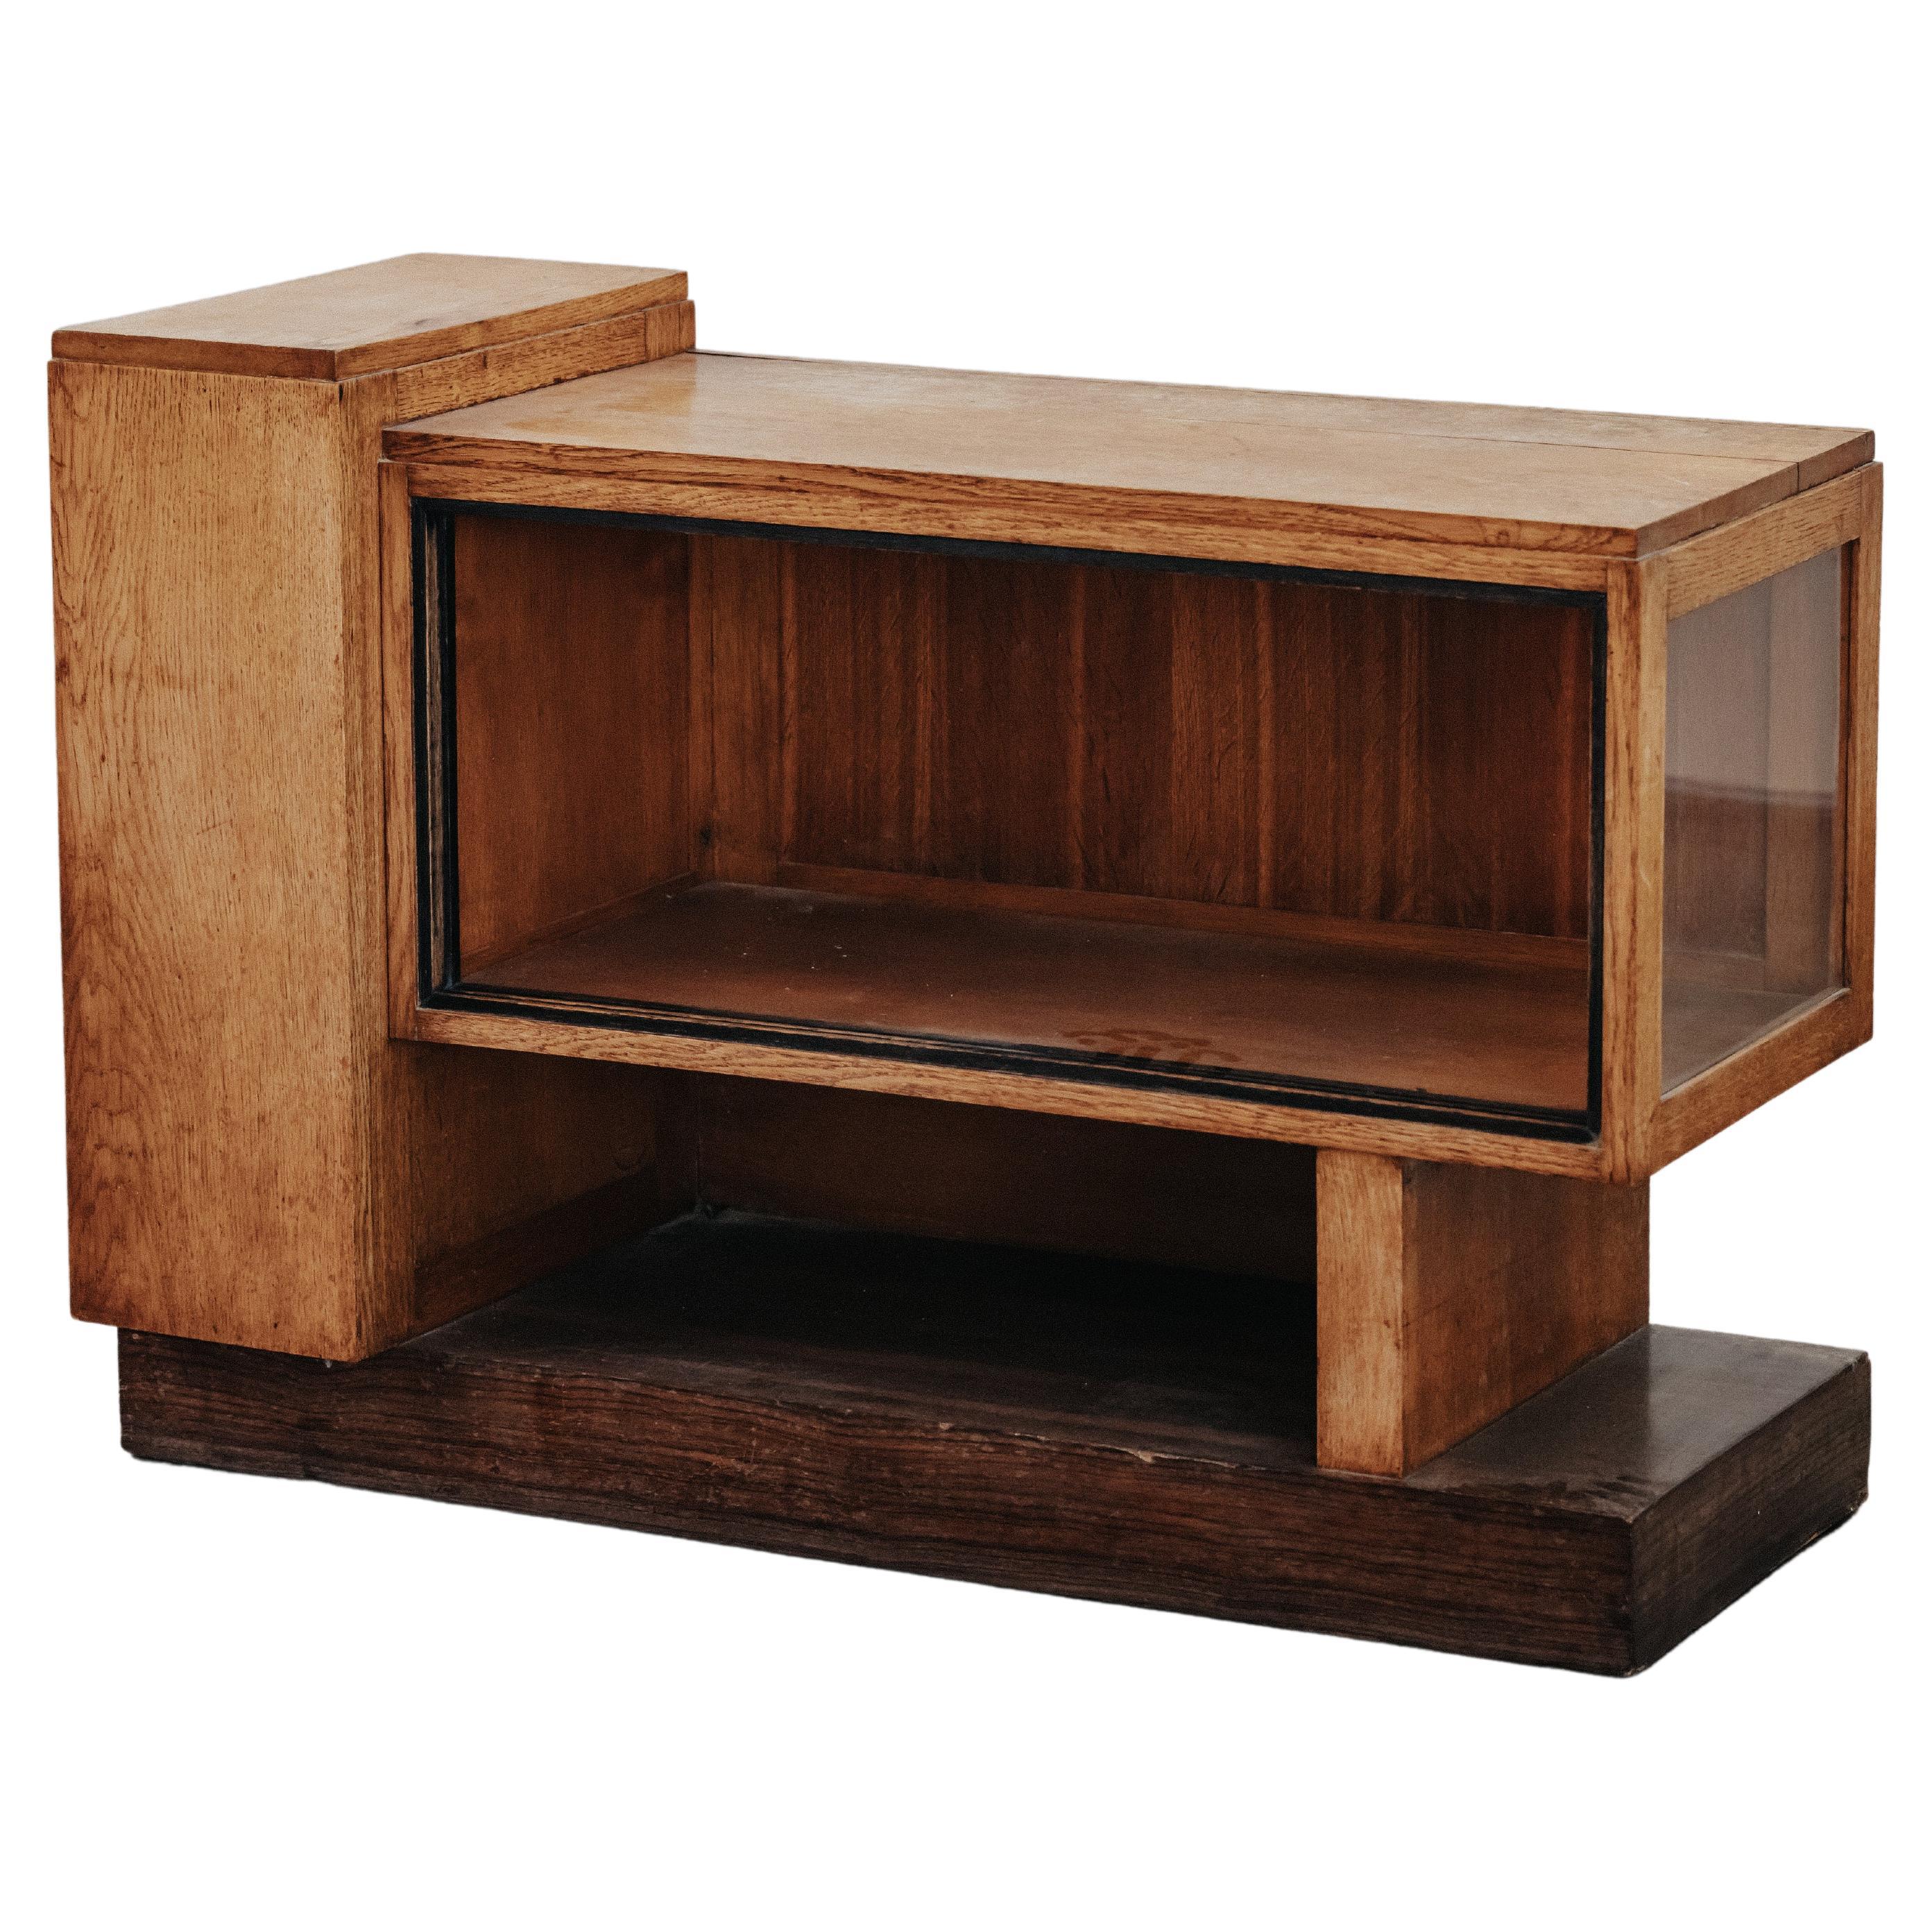 Vintage Art Deco Cabinet From Netherlands, Circa 1950 For Sale